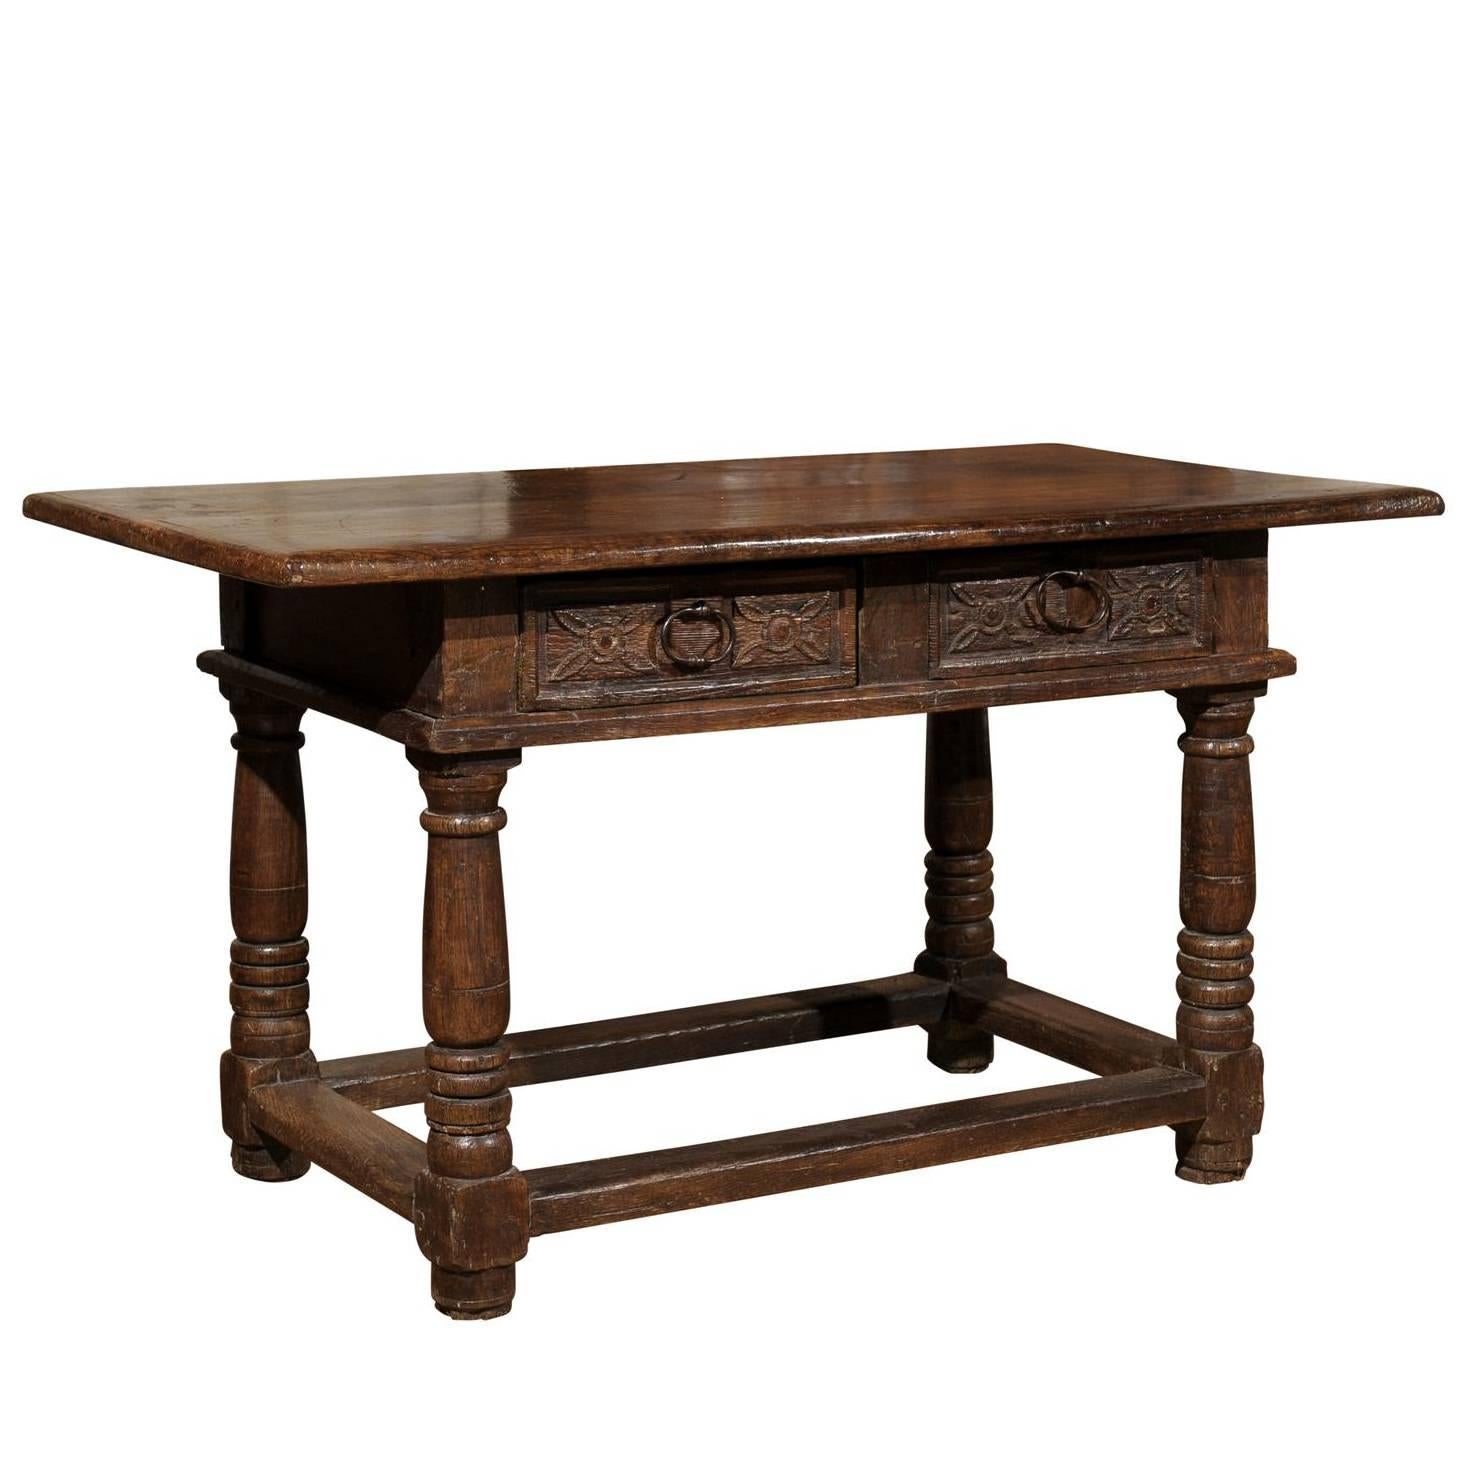 French 1750s Walnut Library Table with Carved Drawers and Original Hardware